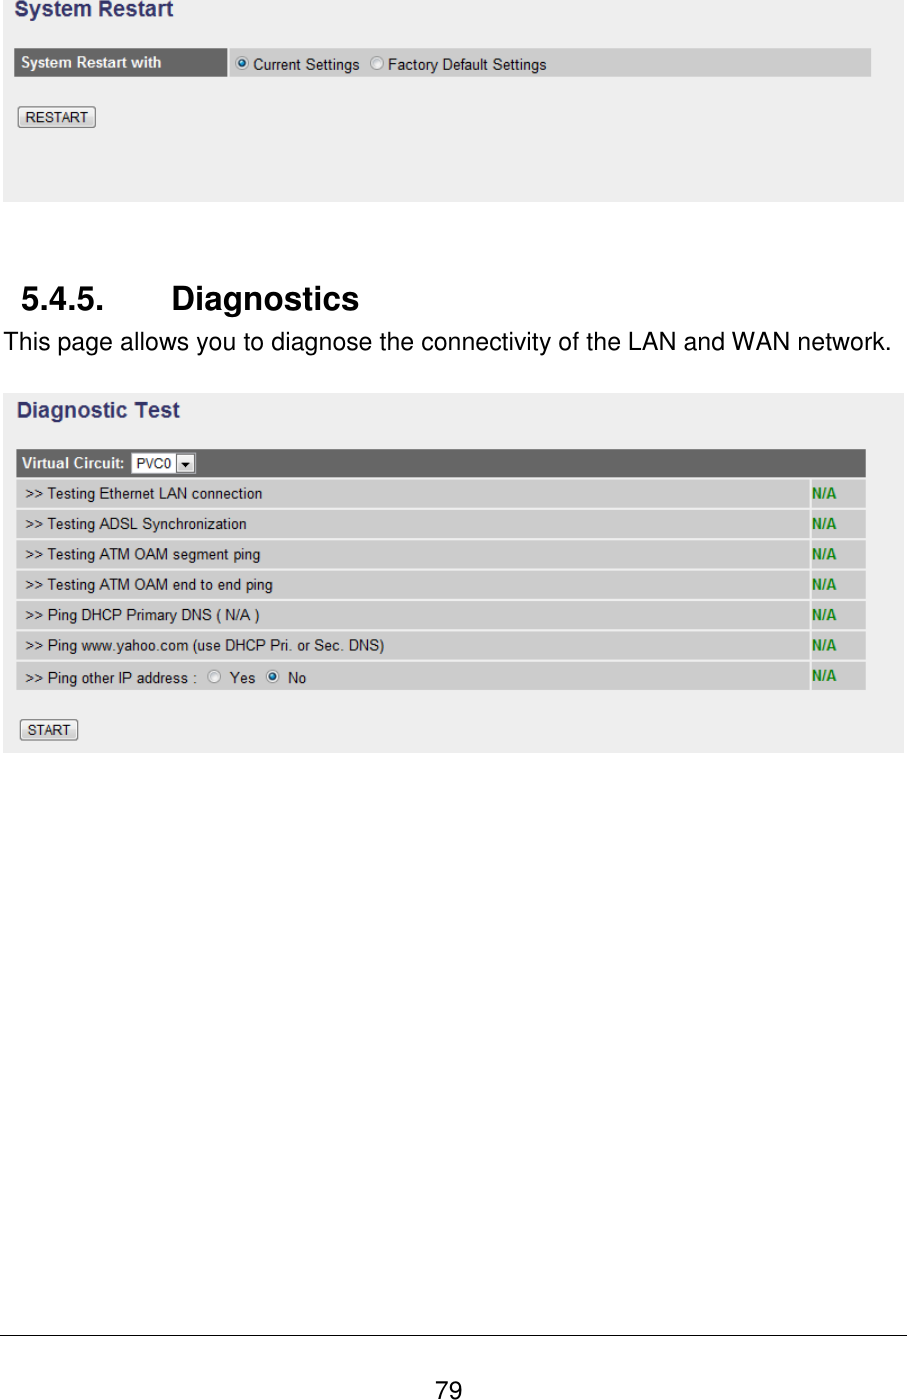   79    5.4.5.  Diagnostics This page allows you to diagnose the connectivity of the LAN and WAN network.      